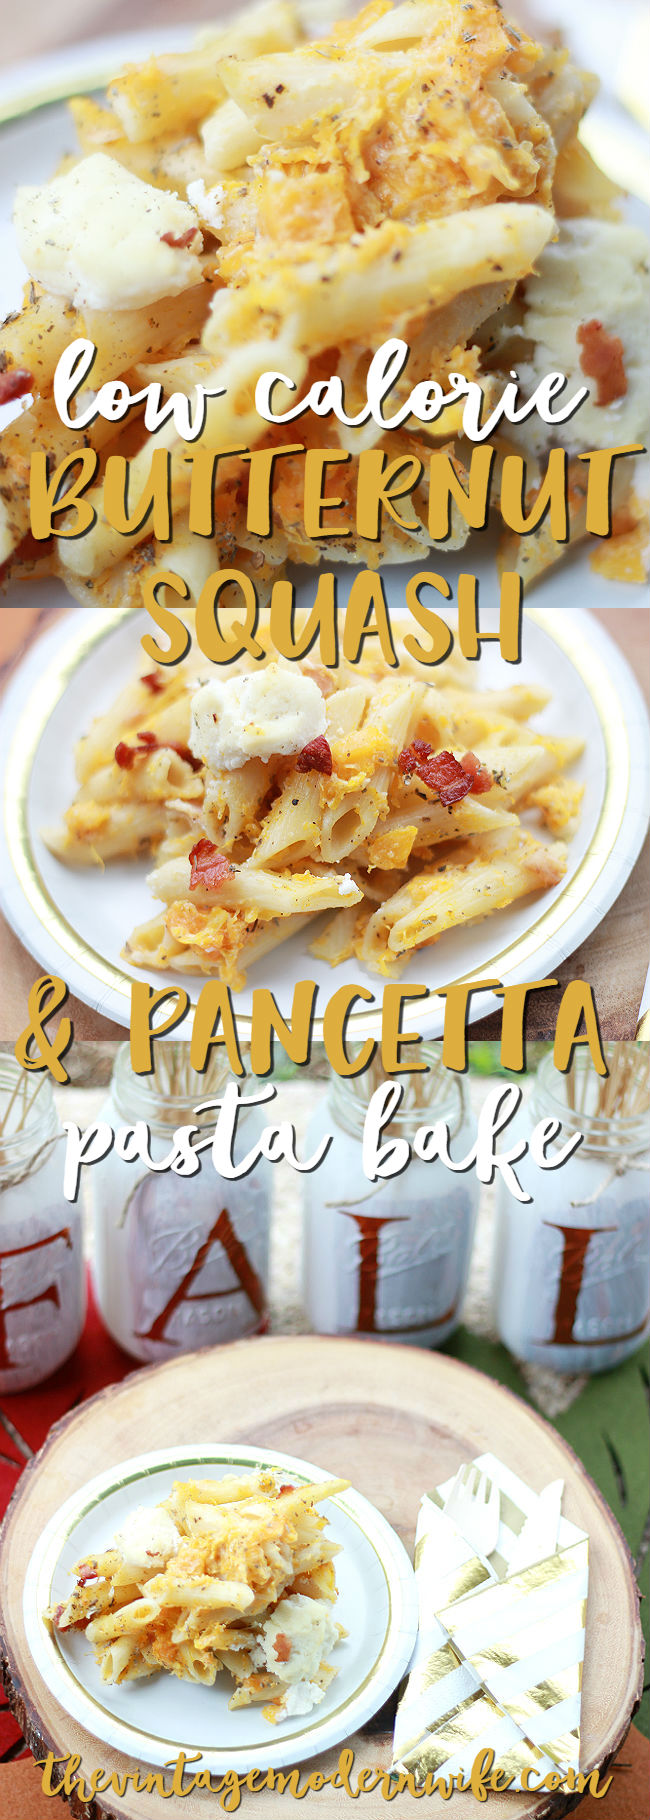 Looking for a pasta bake that'll blow your mind? This Low Calorie Butternut Squash and Pancetta Pasta Bake is so delicious and perfect for Friendsgiving, Thanksgiving, Christmas Eve, or just a crazy week! #MyExceptionalPasta #GoldenHarvest #Pmedia #ad